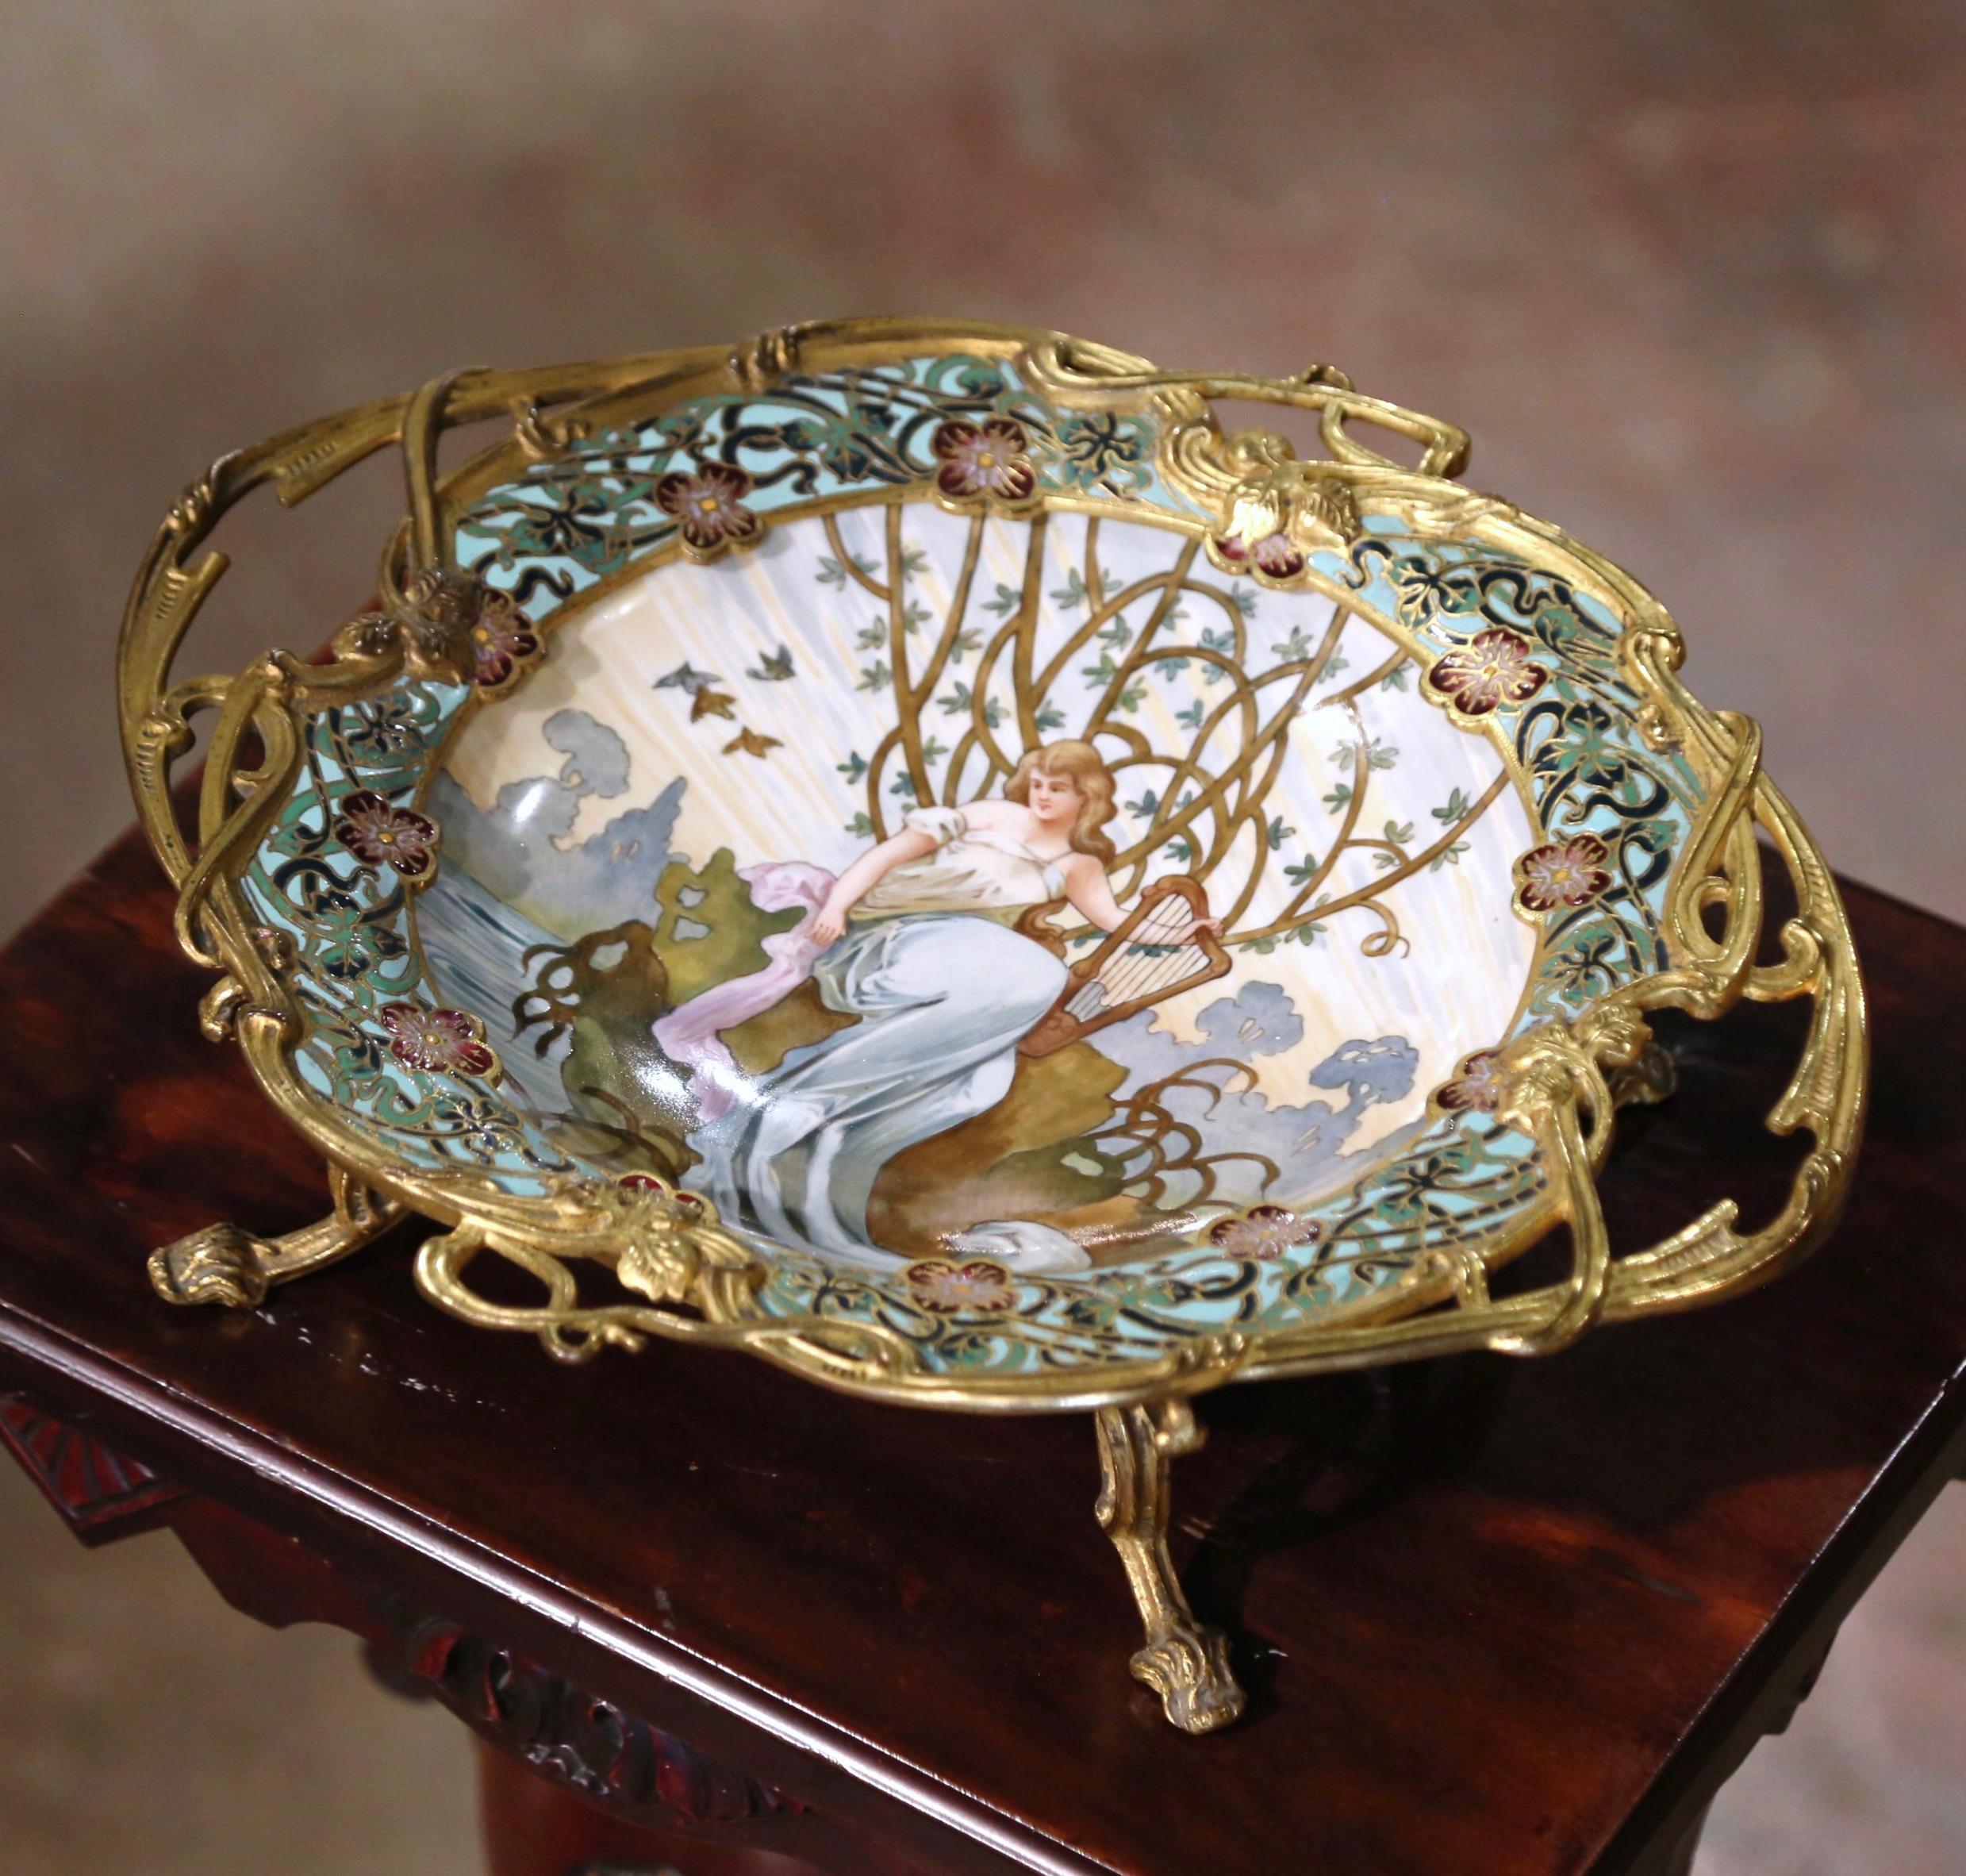 19th Century French Champlevé Enamel and Porcelain Centerpiece Signed Tisserand For Sale 1